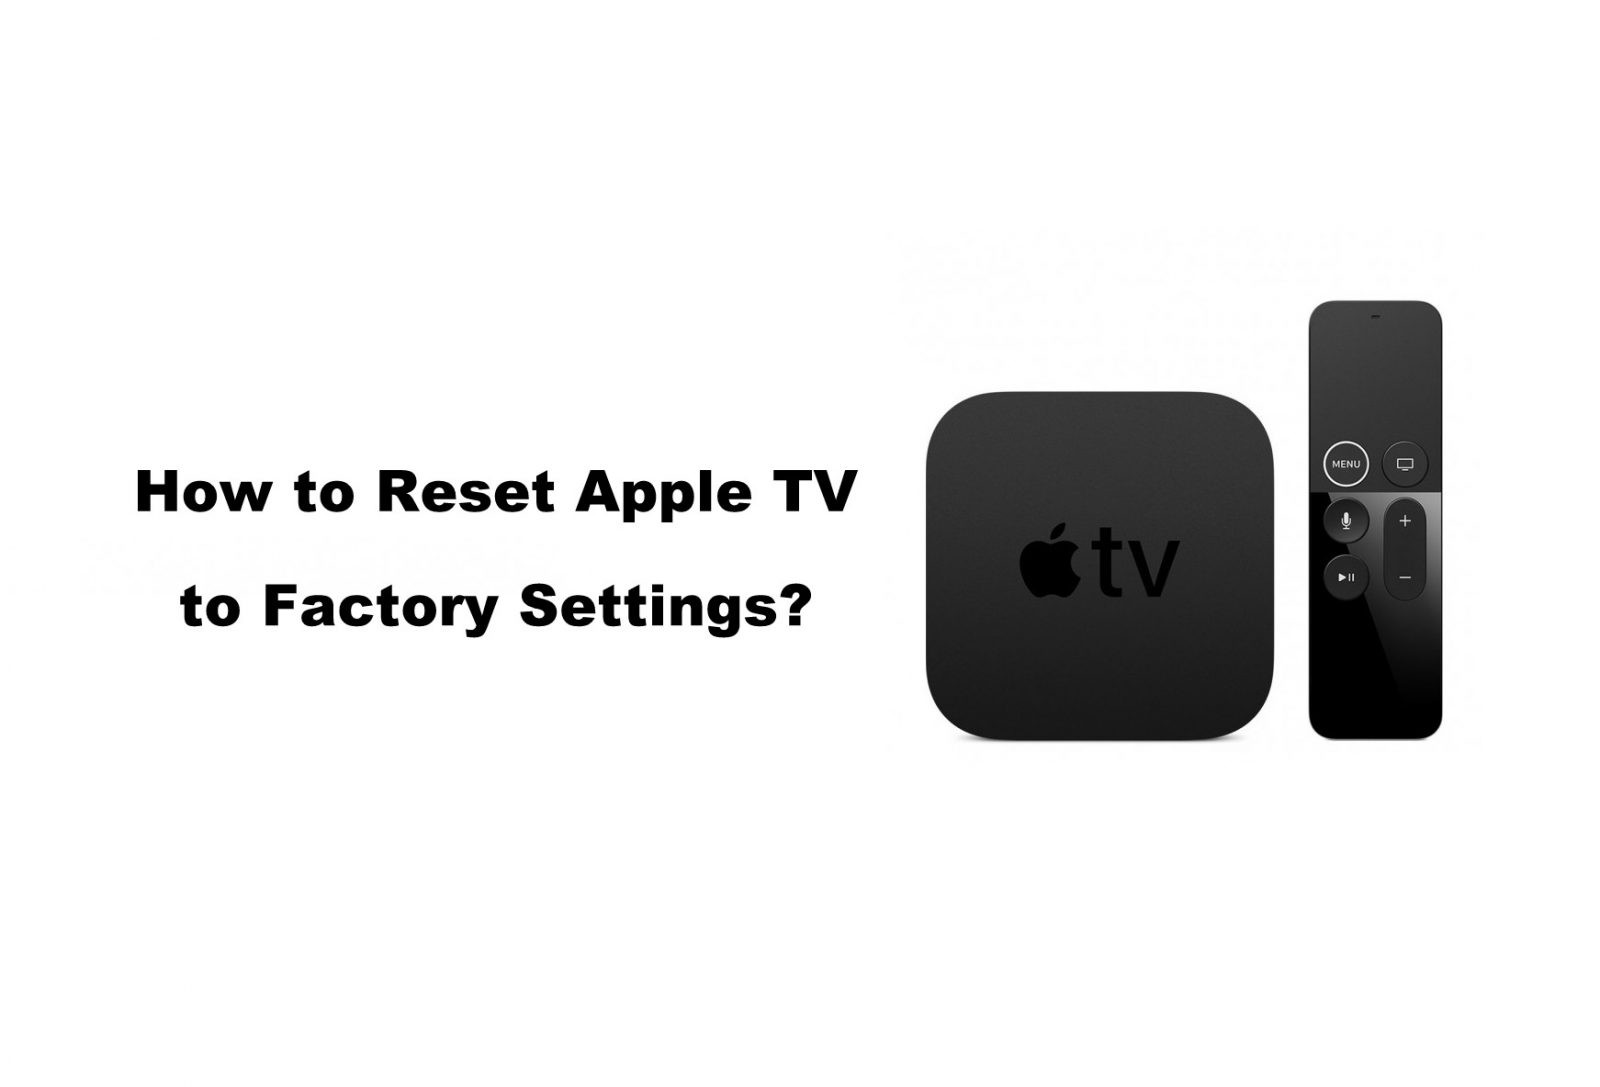 How to Reset Apple TV to Factory Settings [19 Different Ways